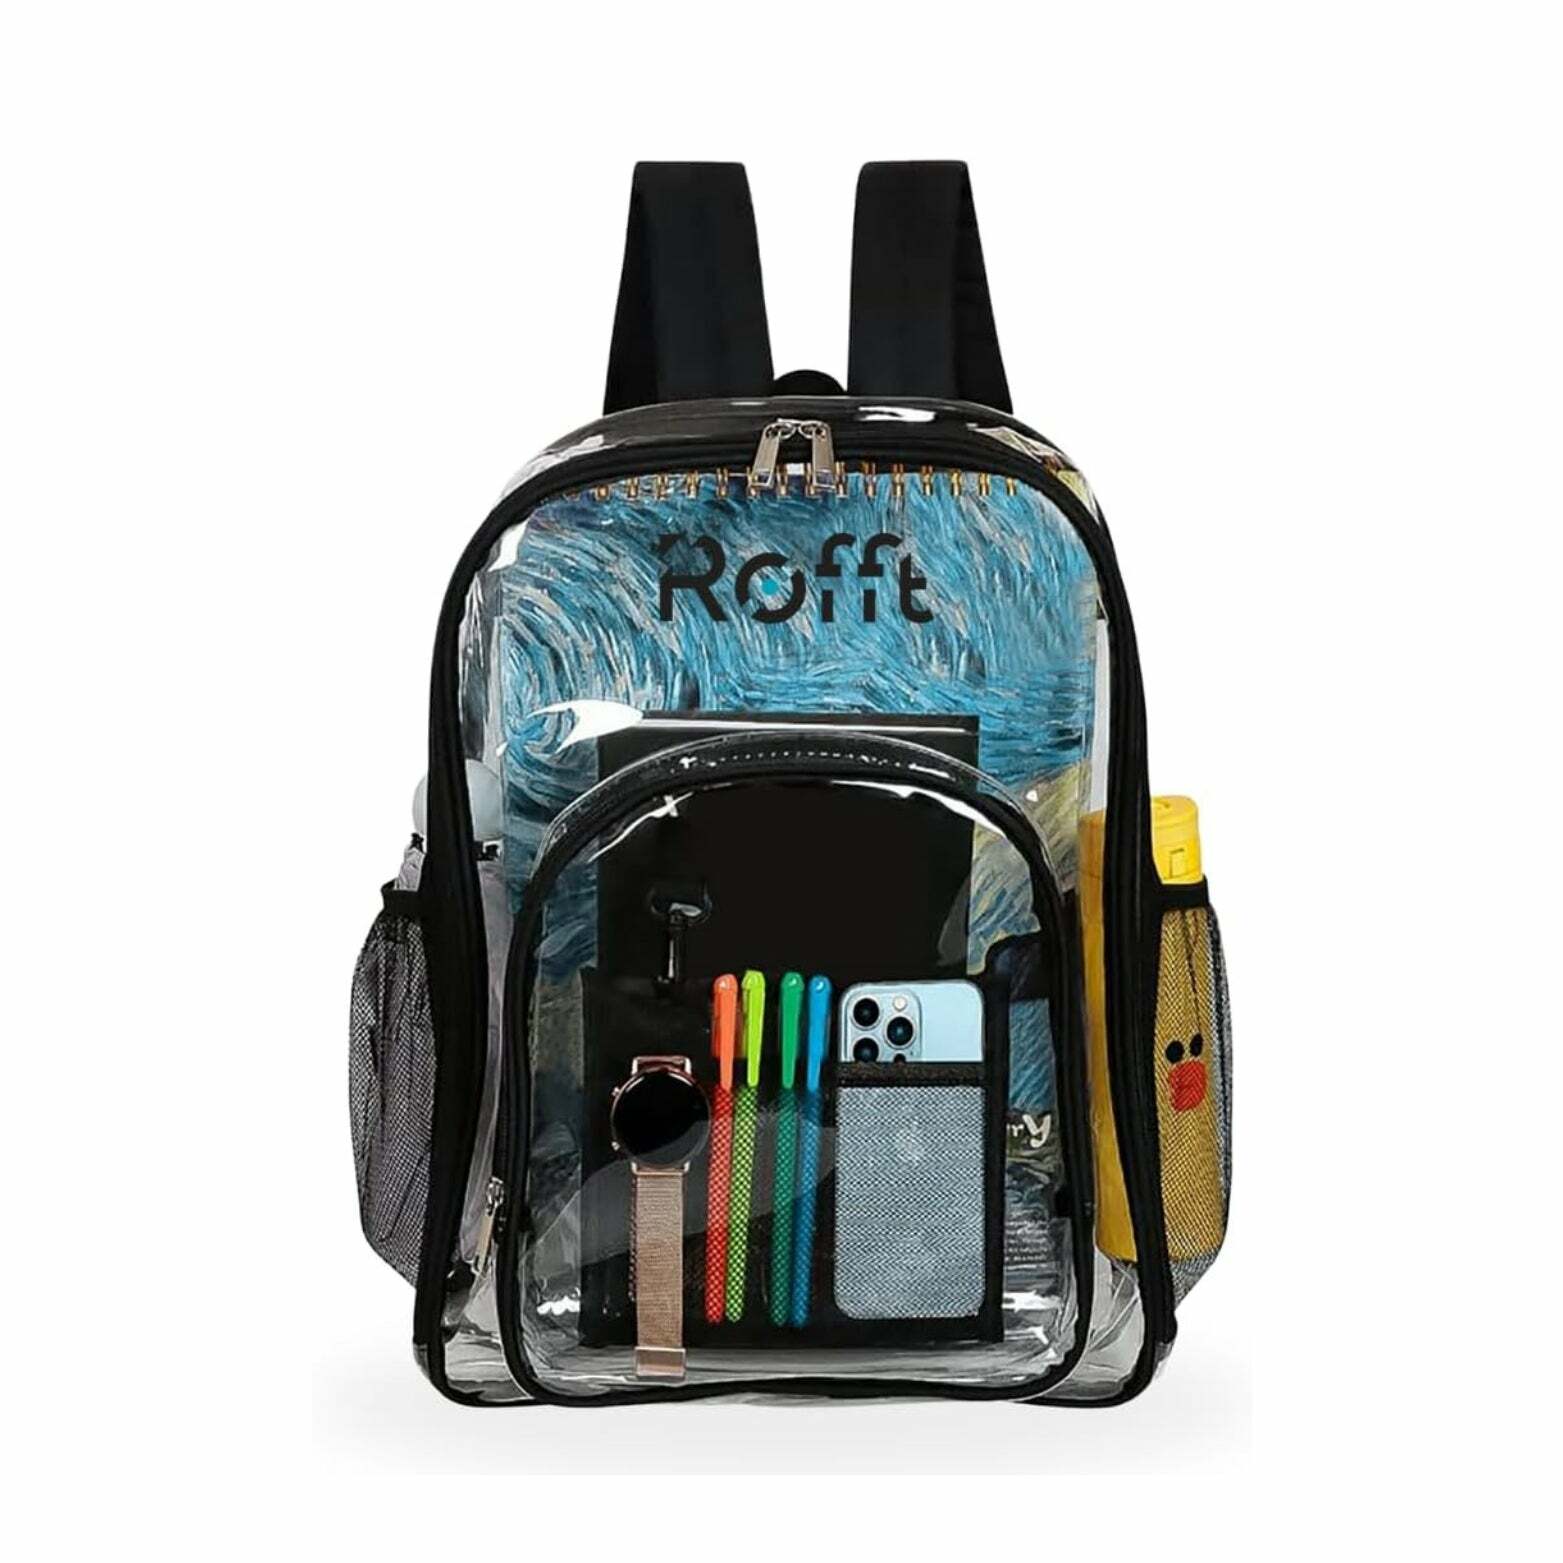 ROFFT Large Clear Backpack - Durable PVC with Reinforced Straps and Multiple Pockets, Black